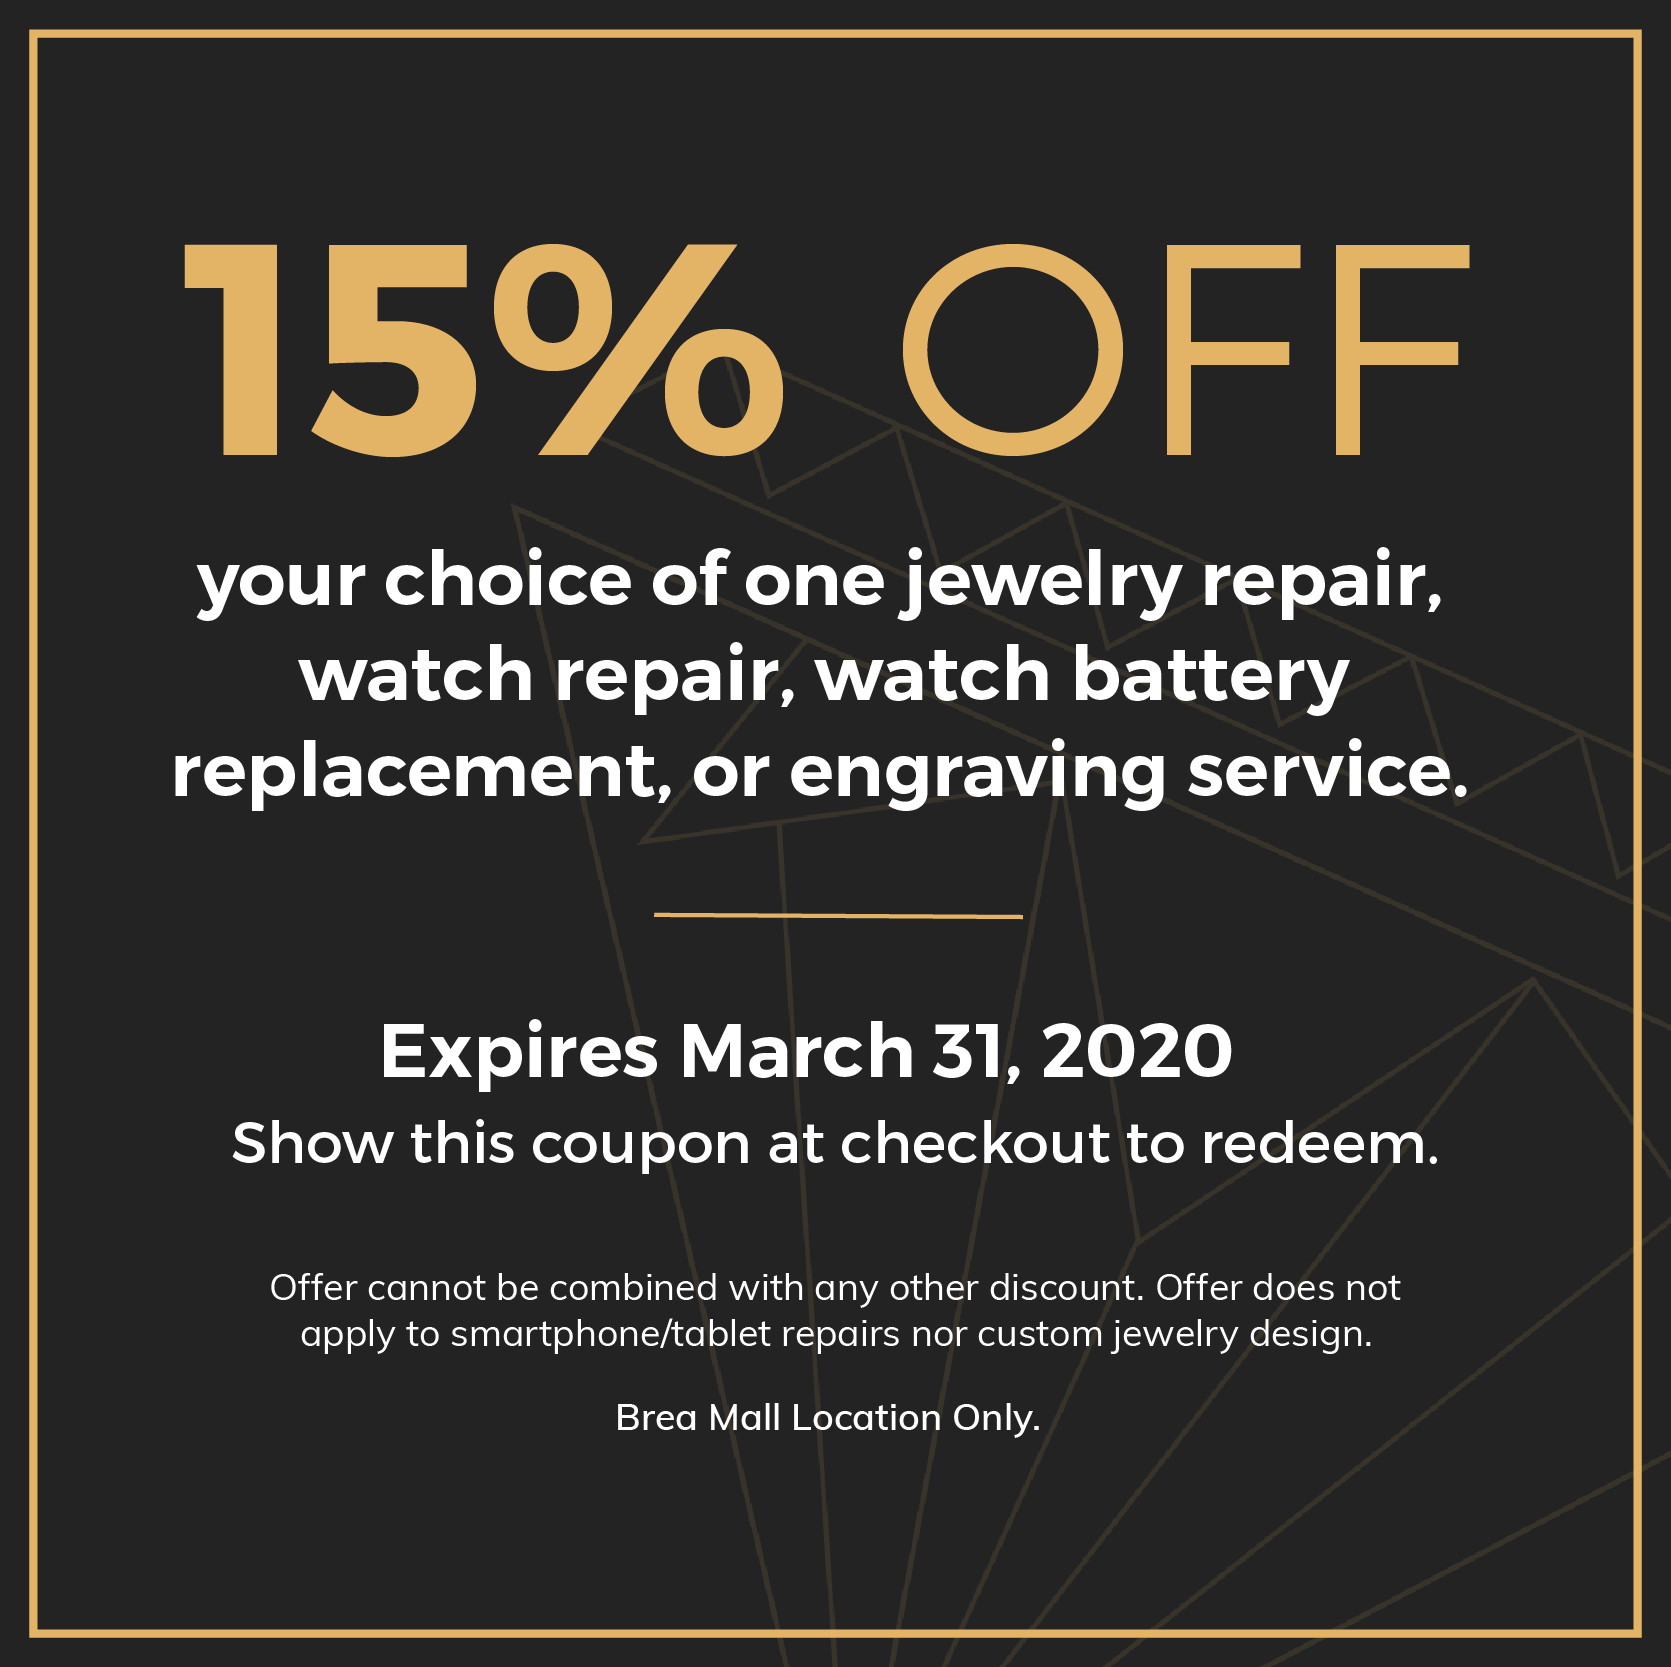 15% OFF. your choice of one jewelry repair, watch repair, watch battery replacement, or engraving service. Expires March 31, 2020. Show this coupon at checkout to redeem. Offer cannot be combined with any other discount. Offer does not apply to smartphone/tablet repairs nor custom jewelry design. Brea Mall Location Only.